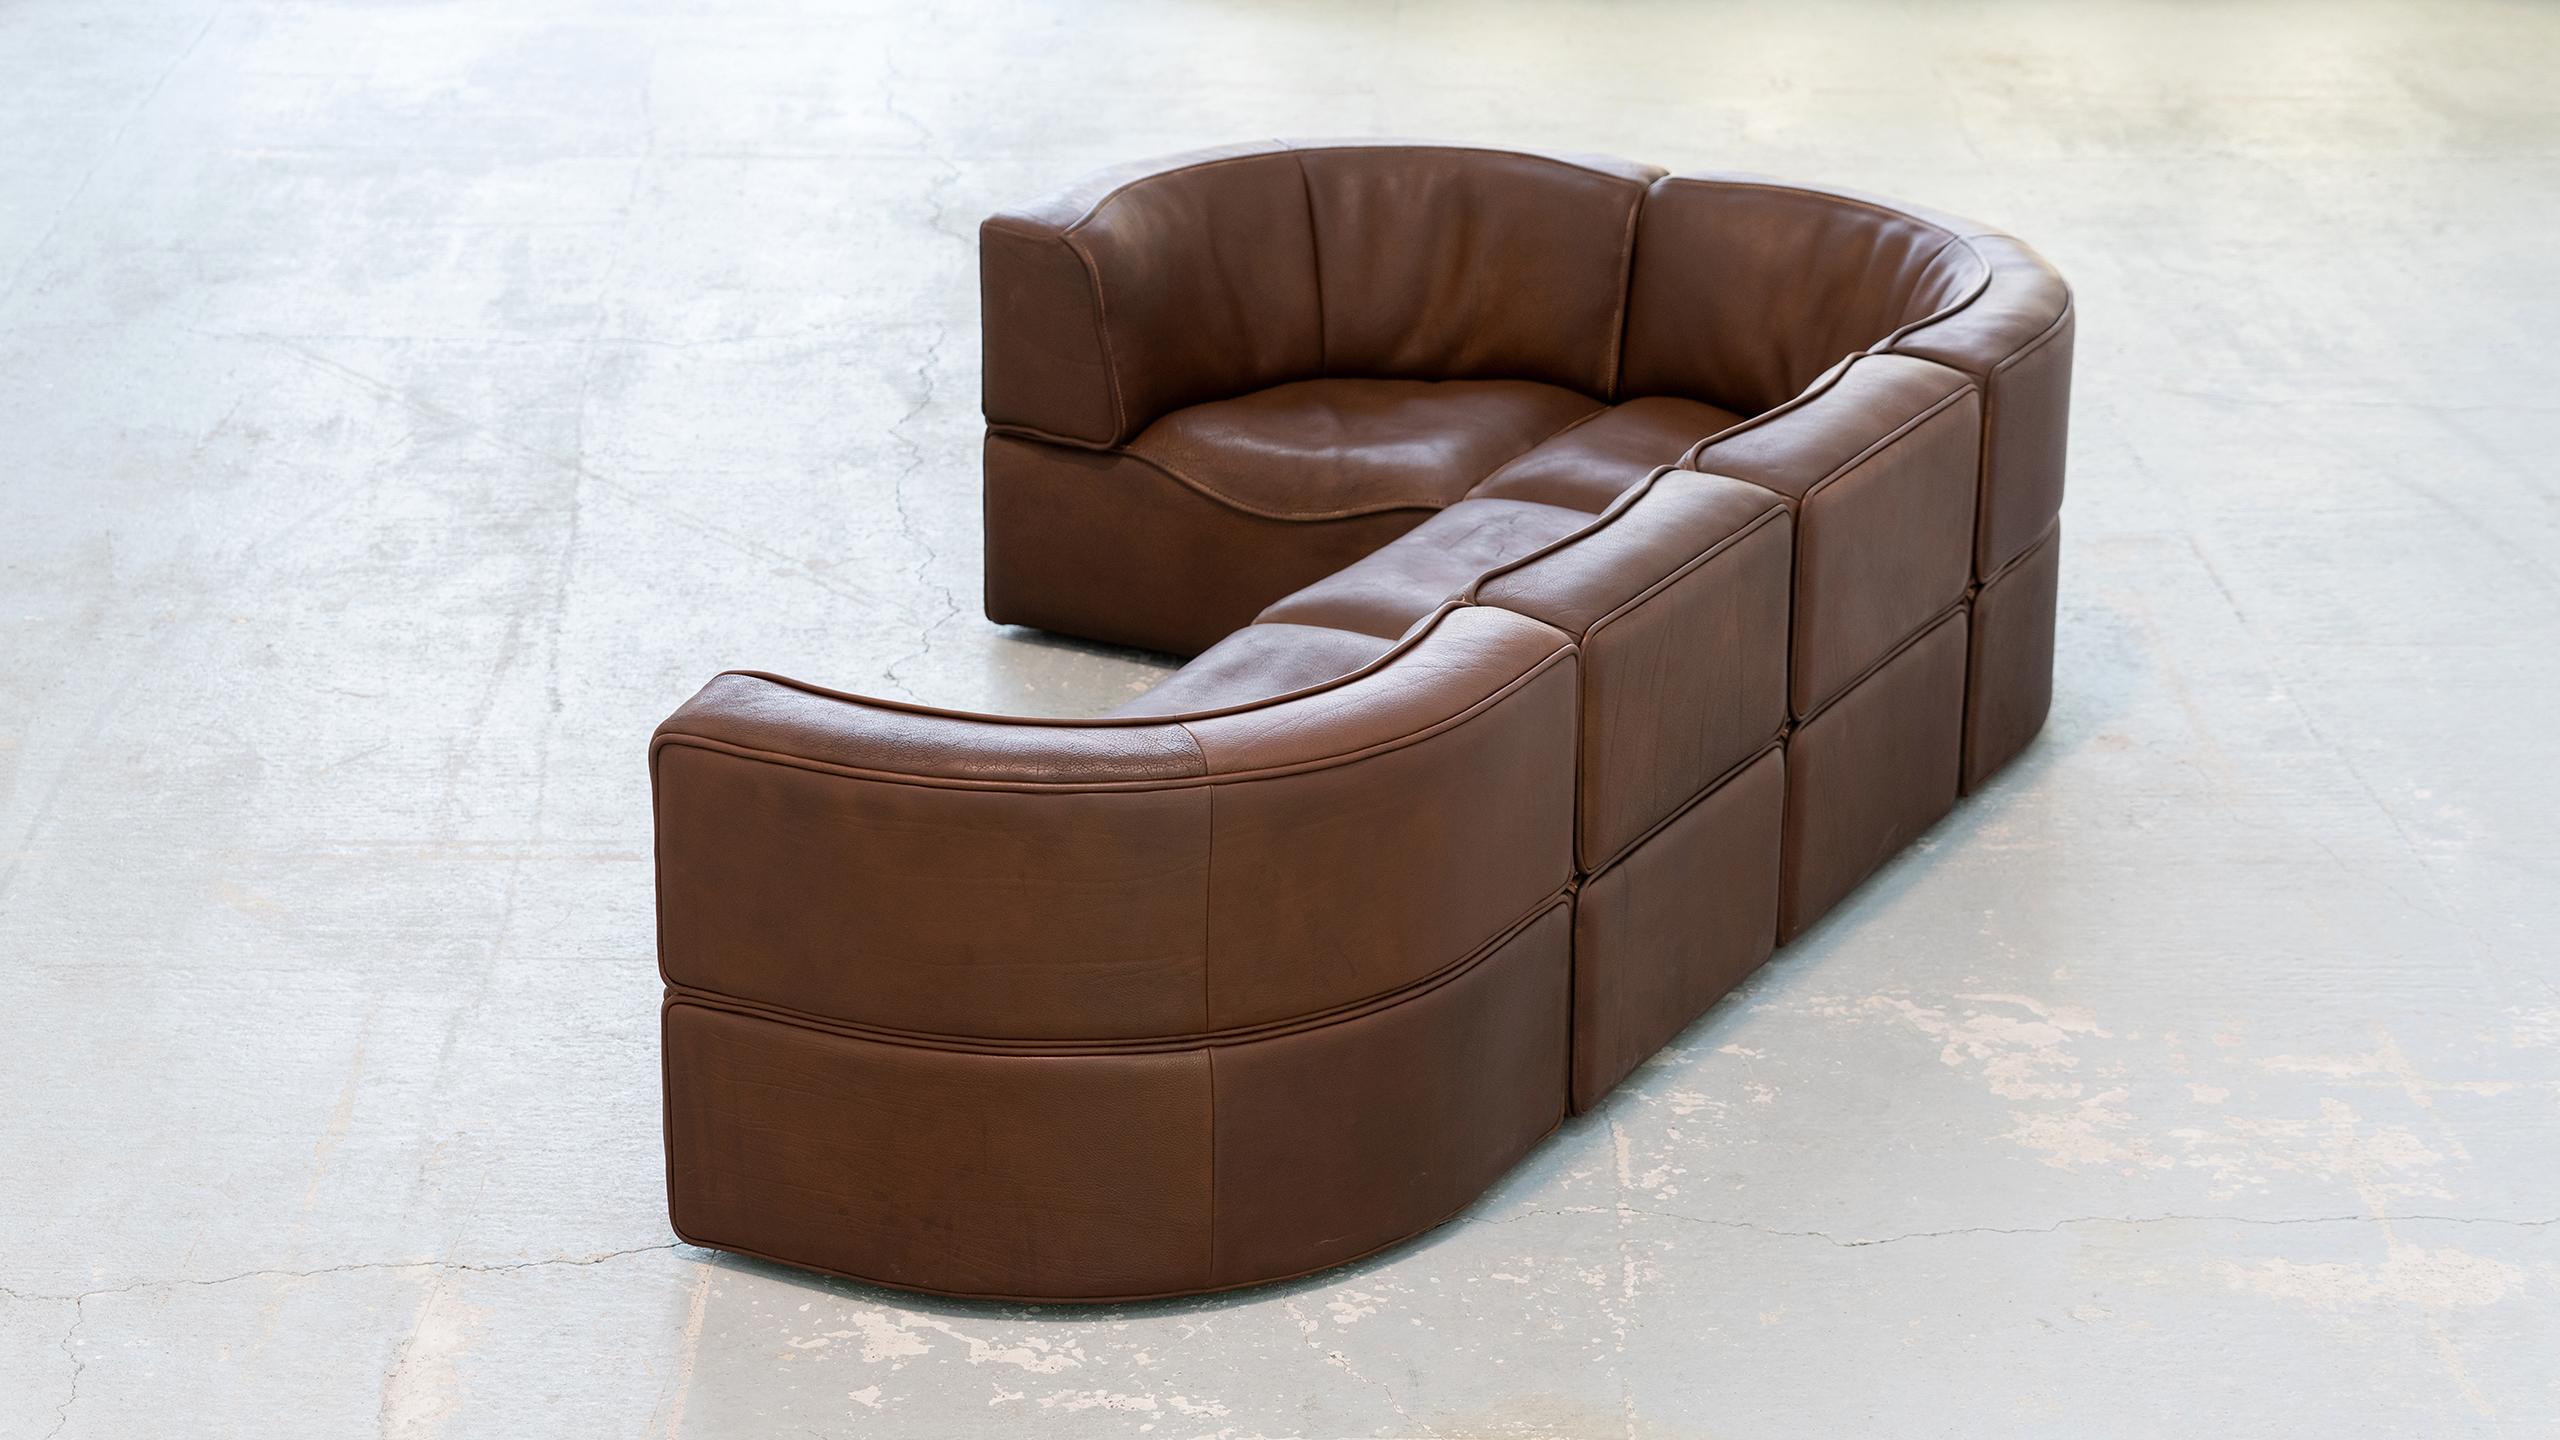 De Sede DS-15 Modular Sofa Neck Leather Brown 1970 Sectional Swiss Mid Century  For Sale 4